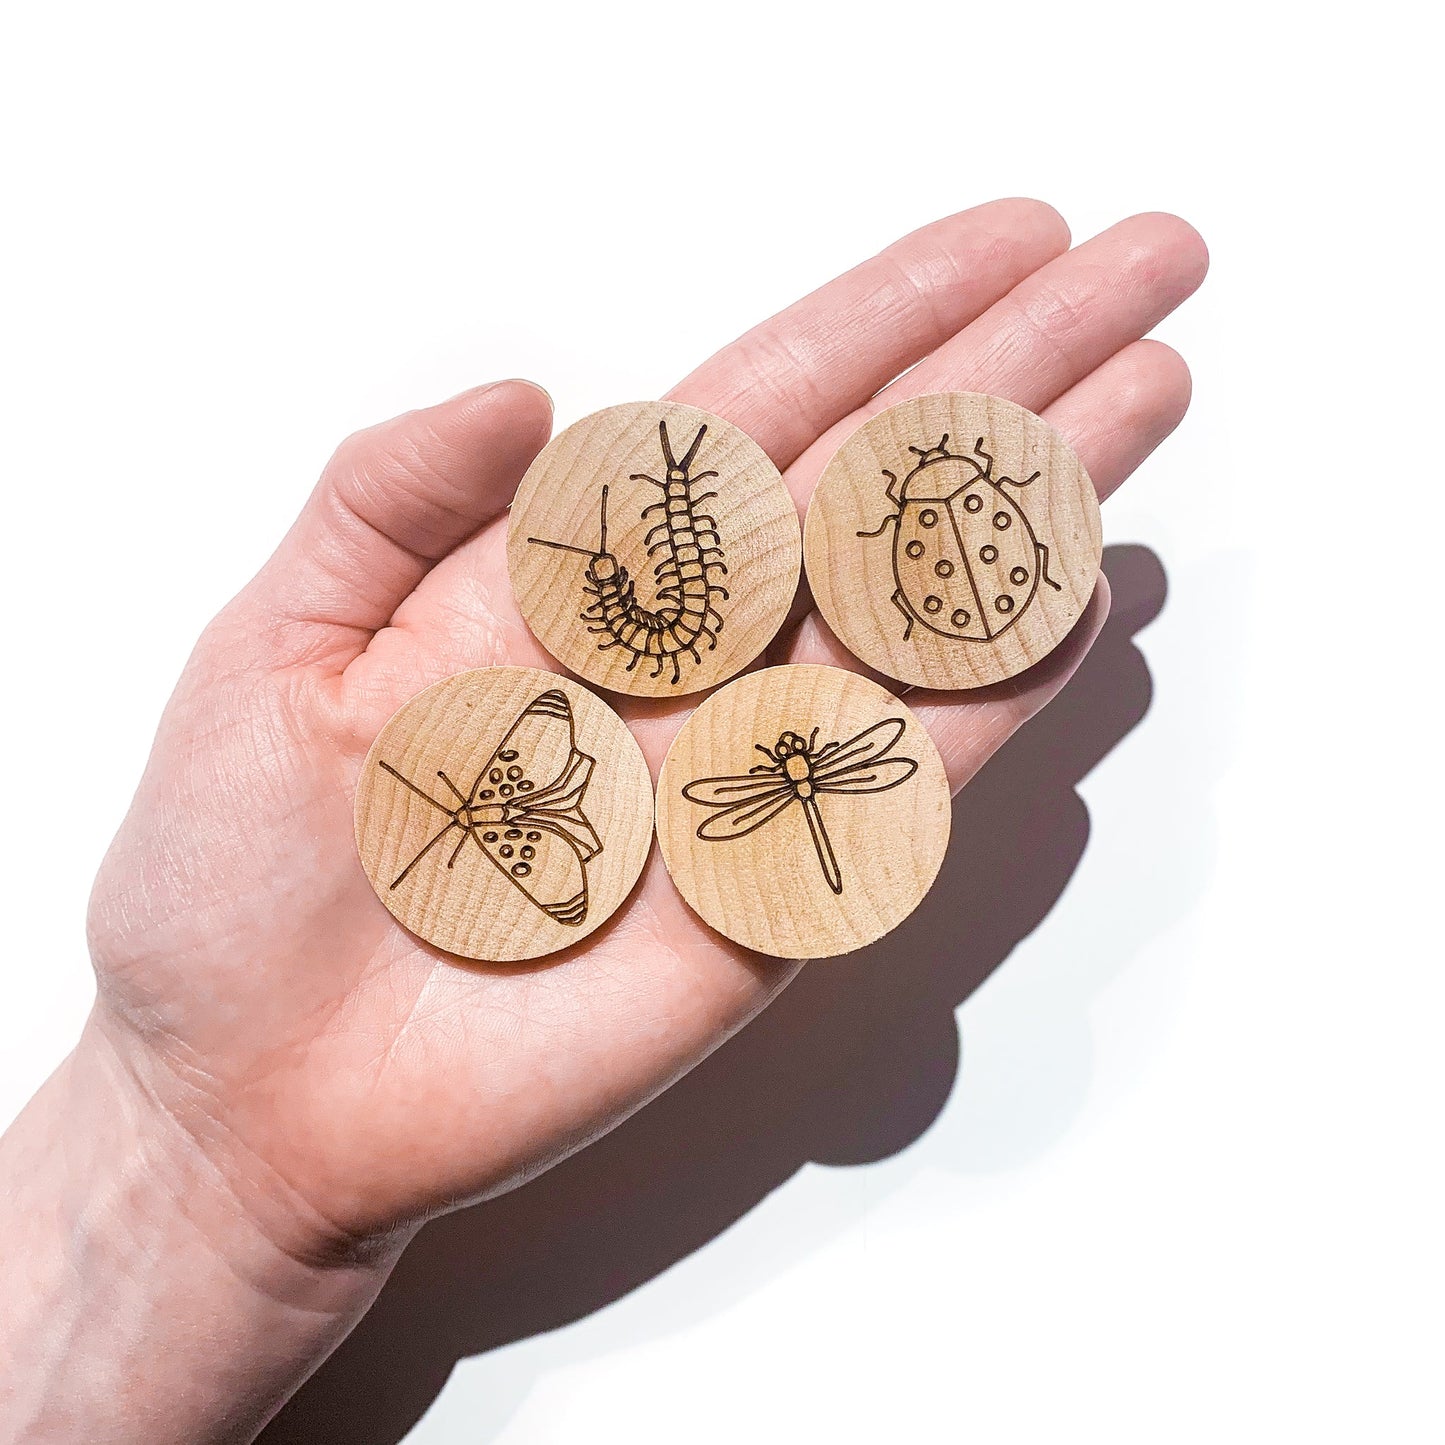 Insect Memory Matching Game